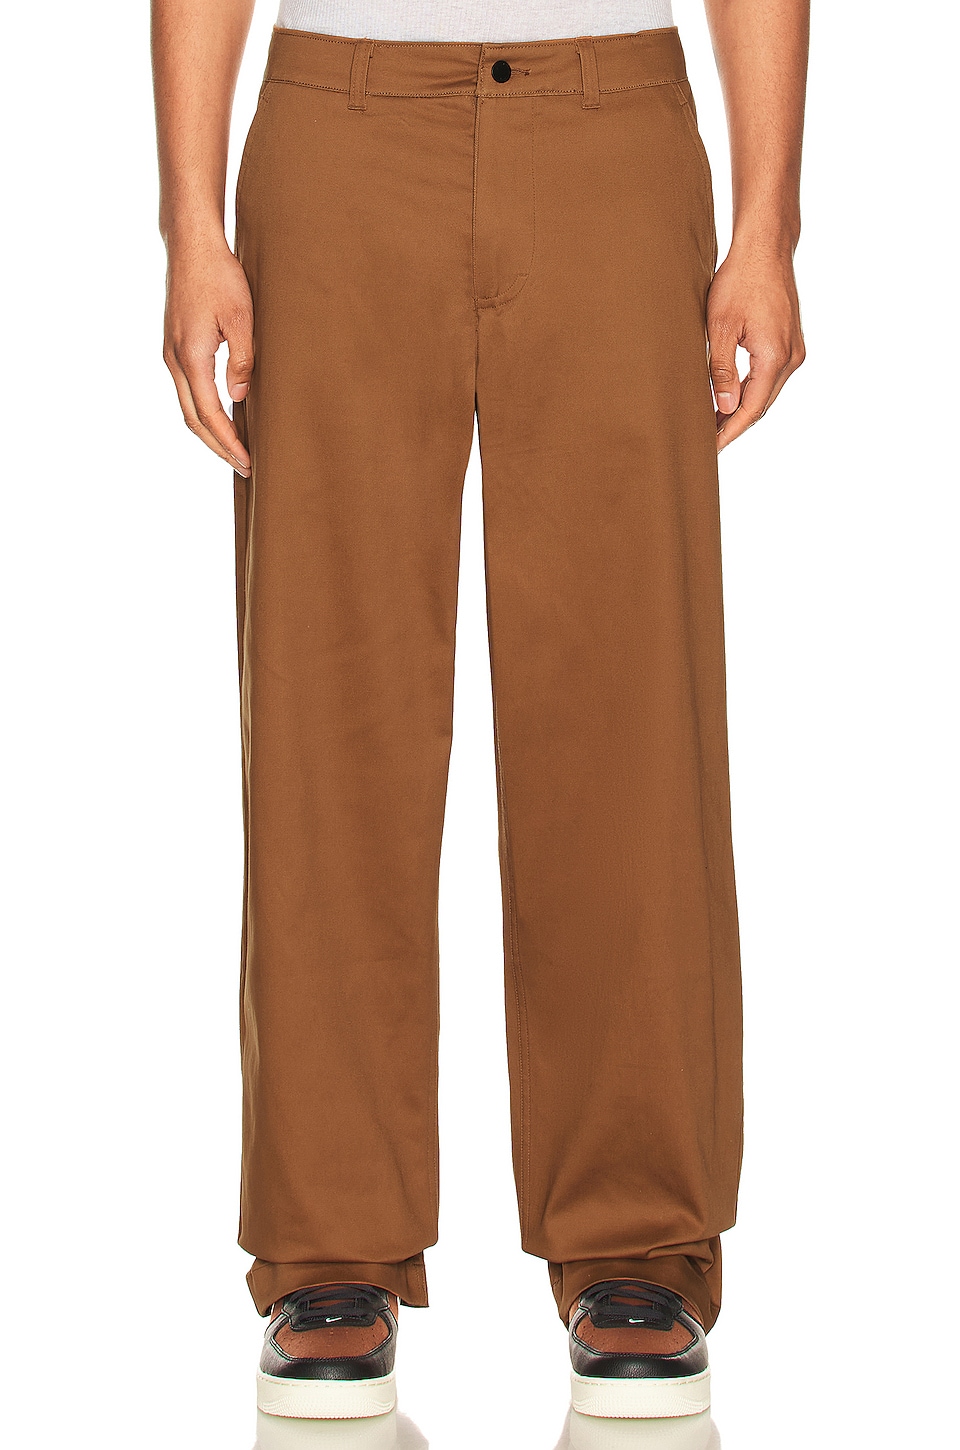 Nike Chino Pant Cotton REVOLVE El M Ale in | Ul Brown/White Nl